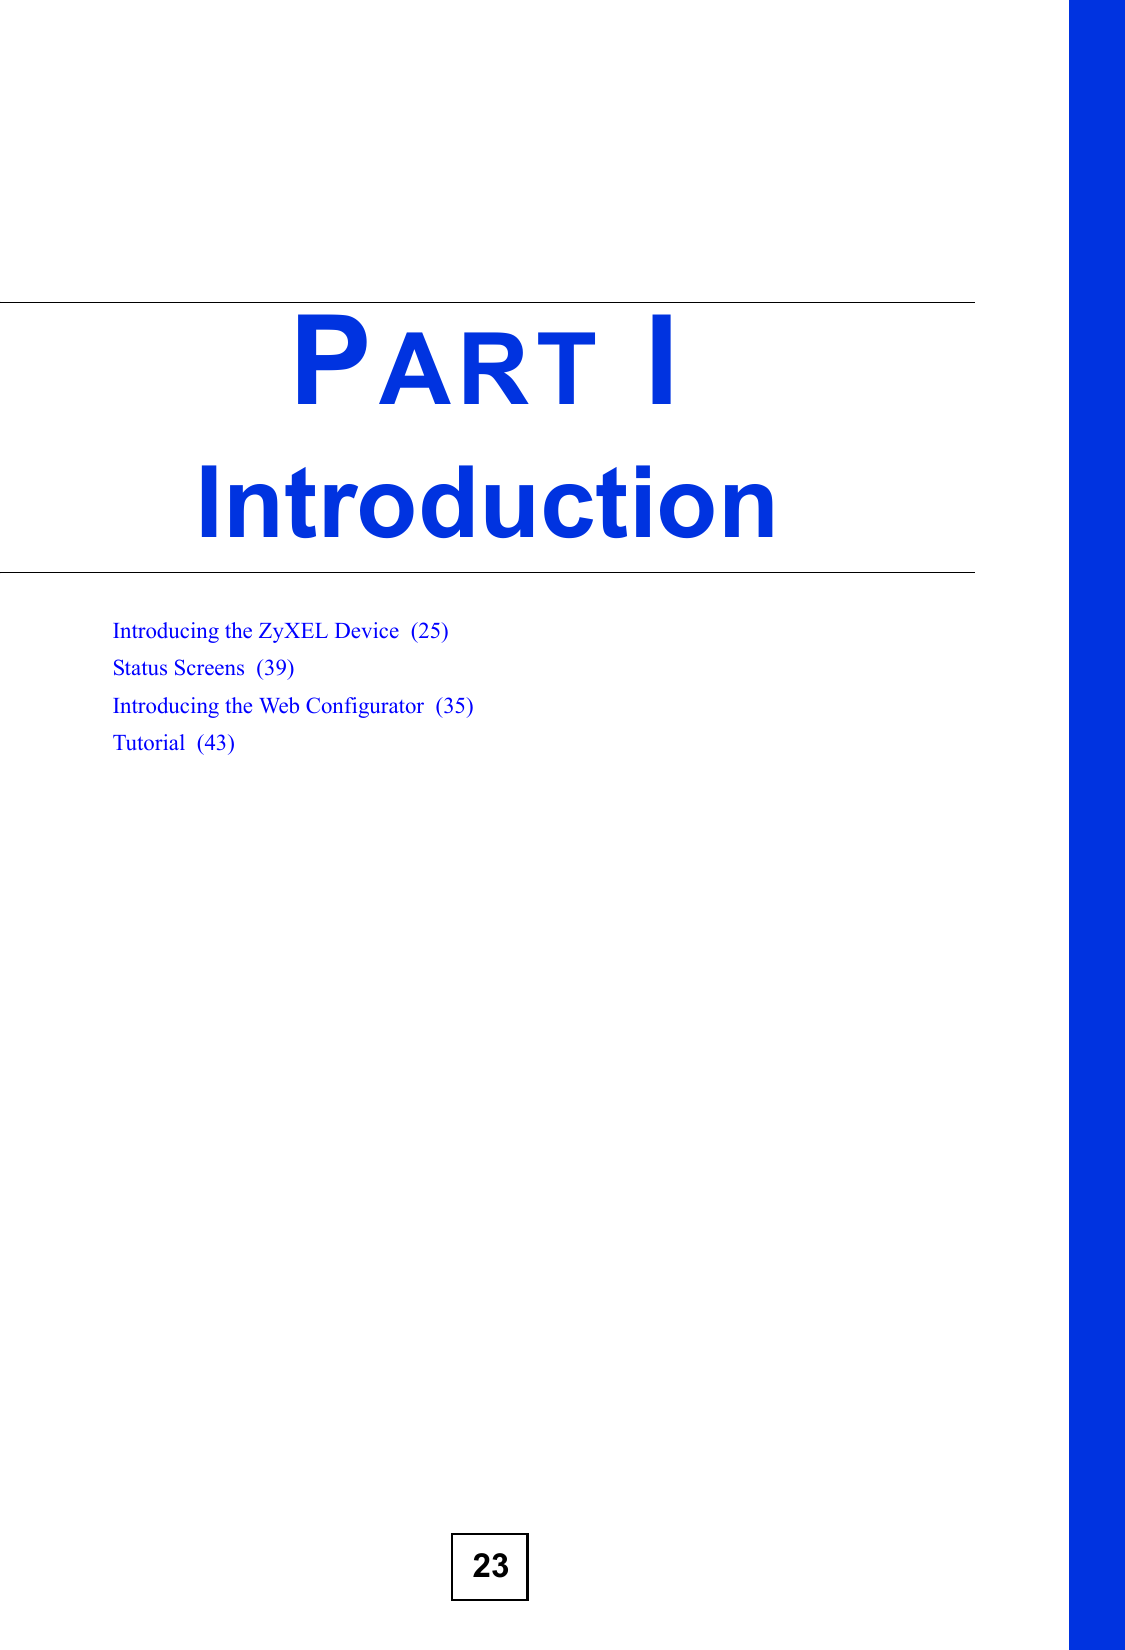 23PART IIntroductionIntroducing the ZyXEL Device  (25)Status Screens  (39)Introducing the Web Configurator  (35)Tutorial  (43)